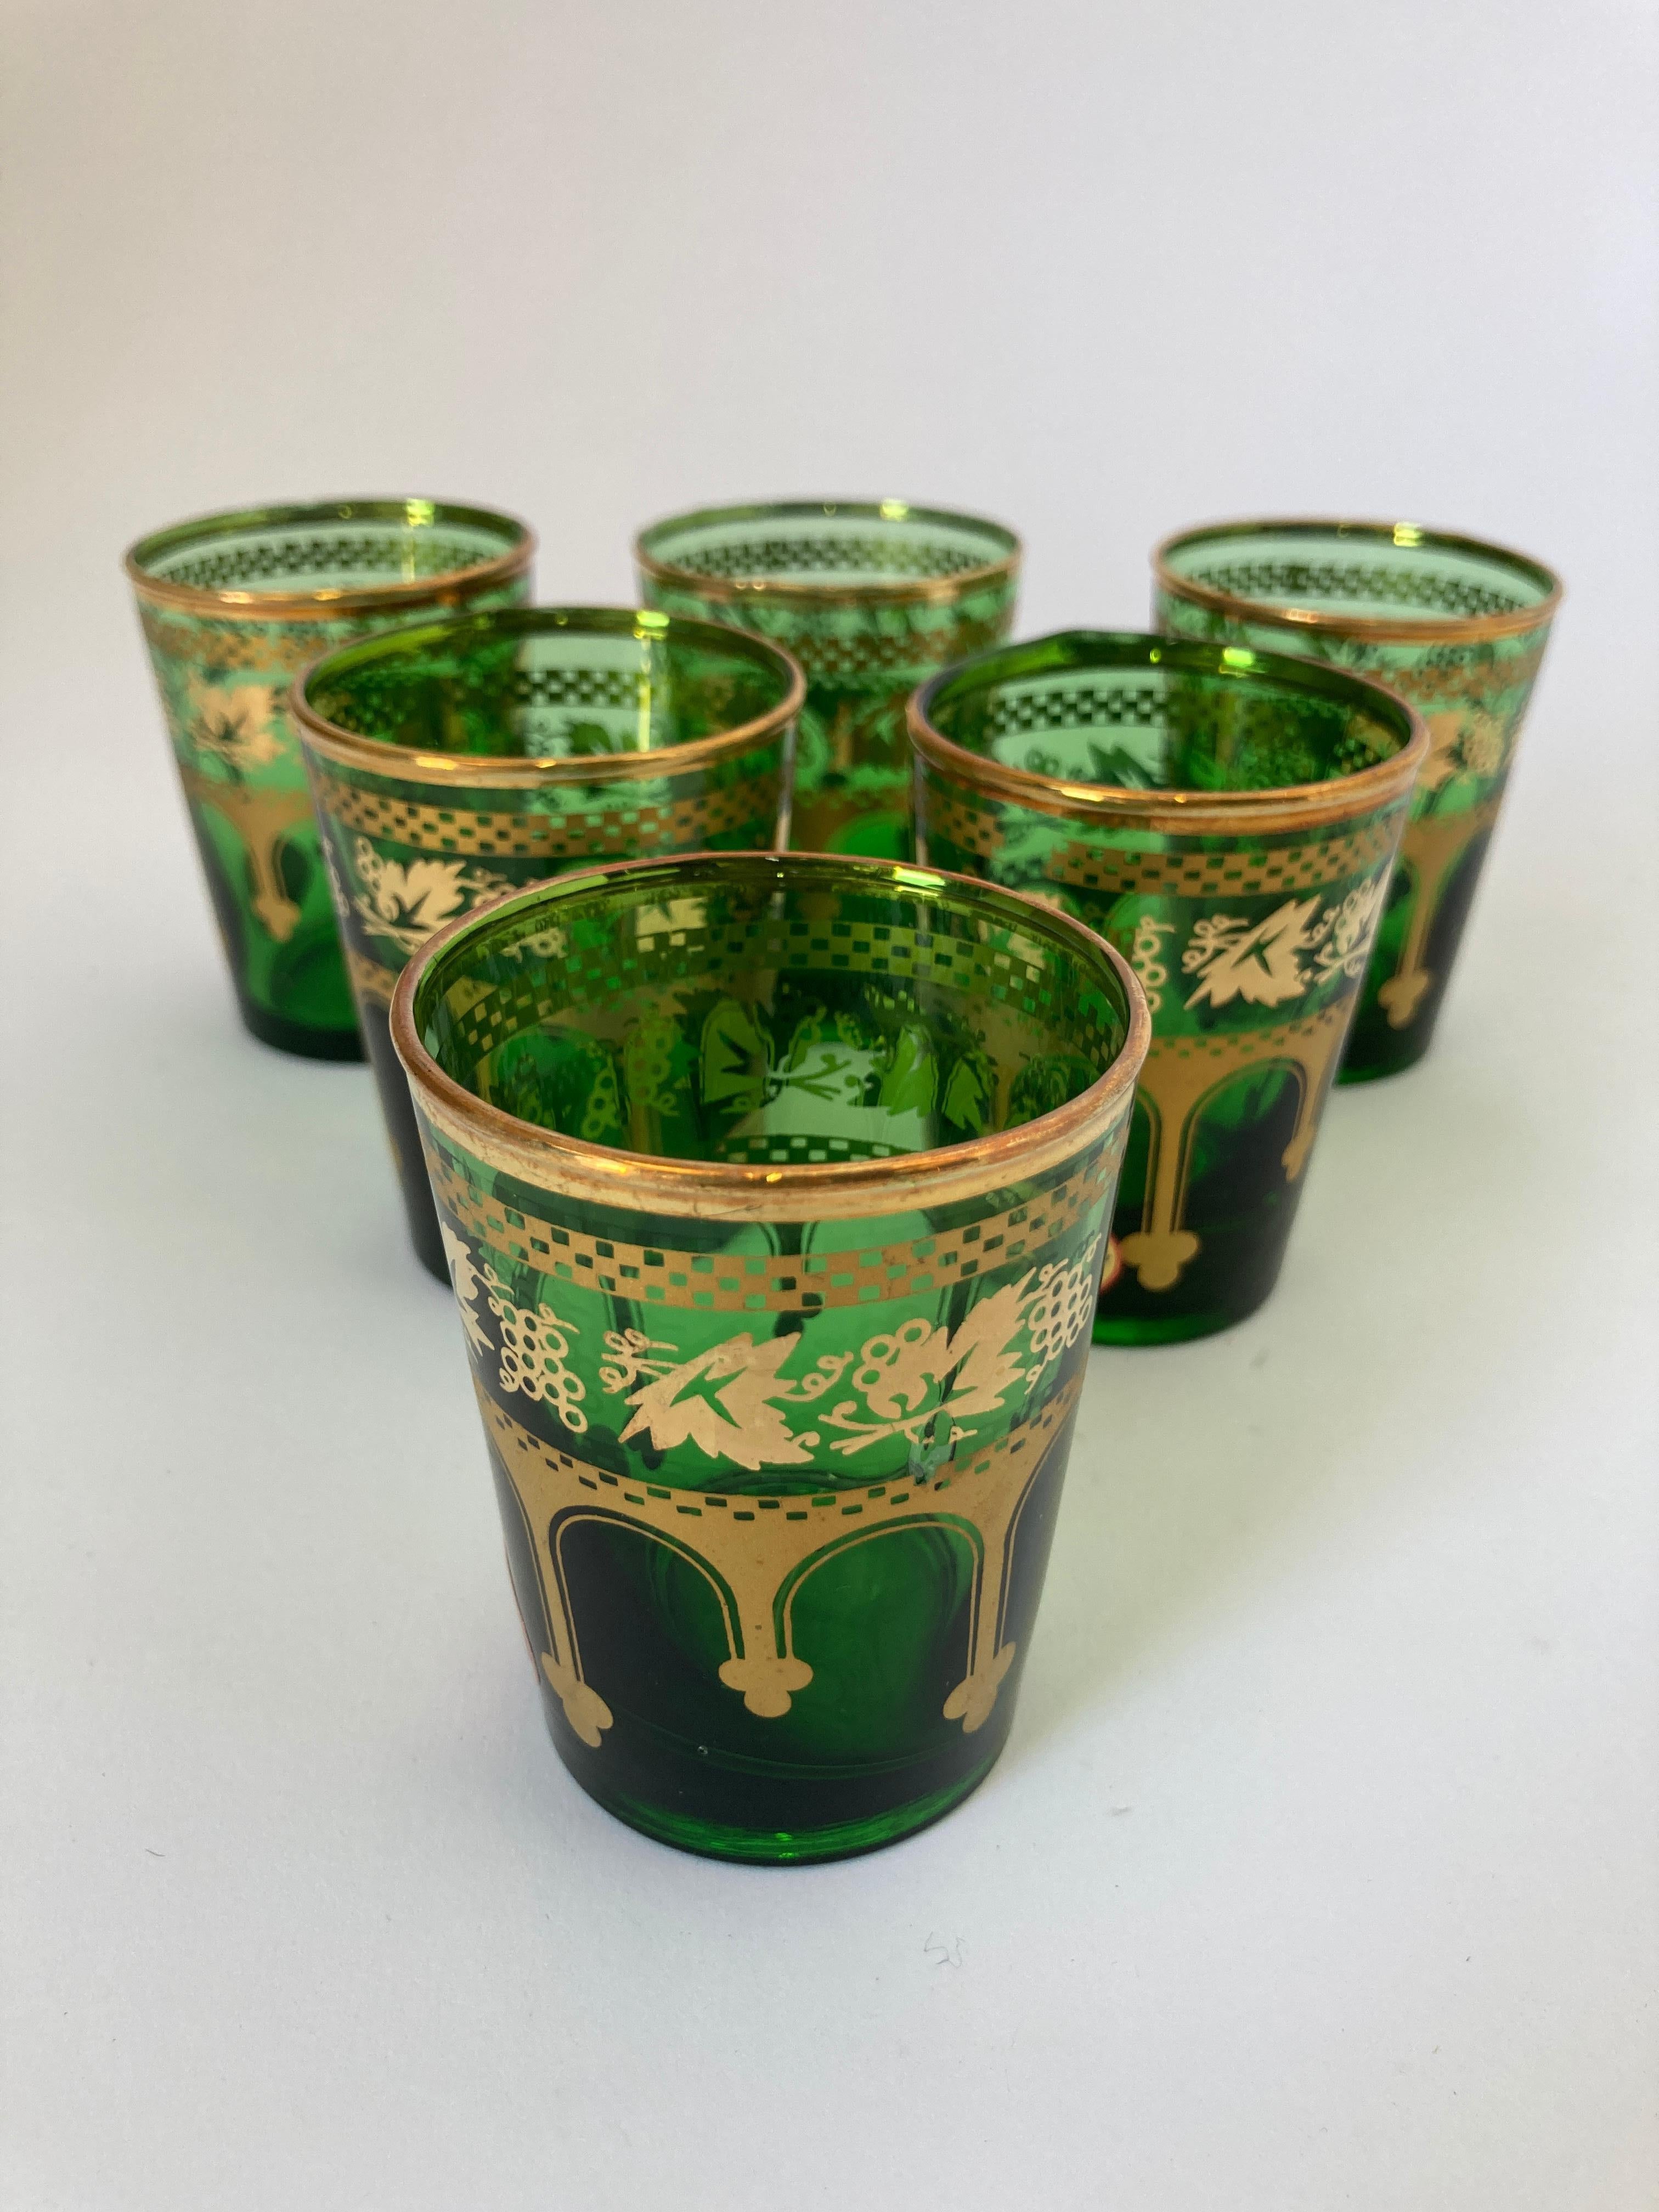 Set of six green and gold handblown Moorish Moroccan glasses.
Use them for Moroccan tea, or any hot or cold drink.
Shot glasses very light finely decorated with a classical gold Moorish pattern frieze.
Use these elegant glasses for Moroccan tea, or